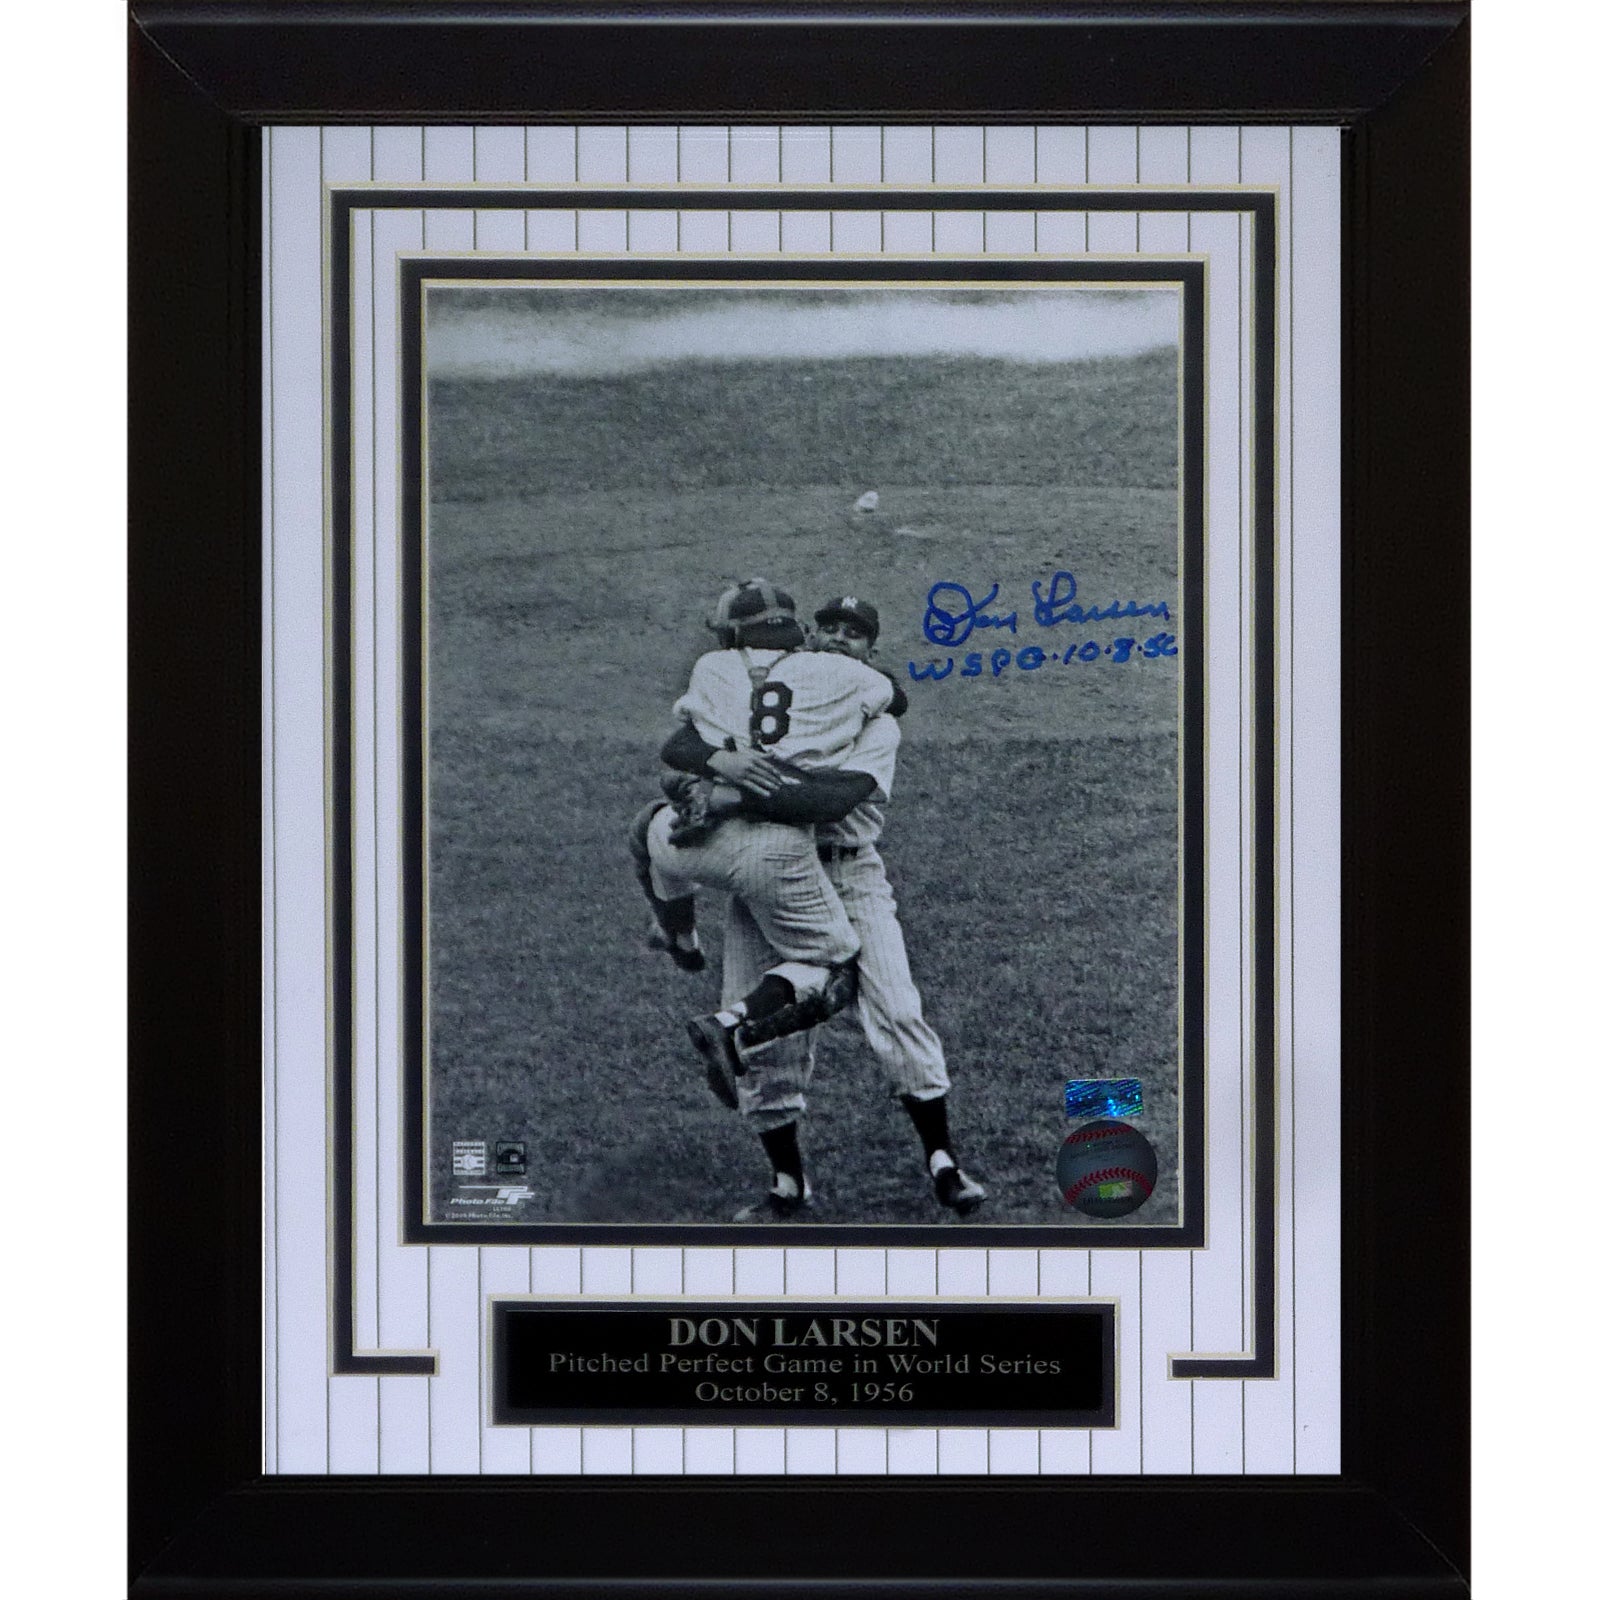 Don Larsen Autographed New York Yankees (Perfect Game with Berra) Framed 8x10 Photo